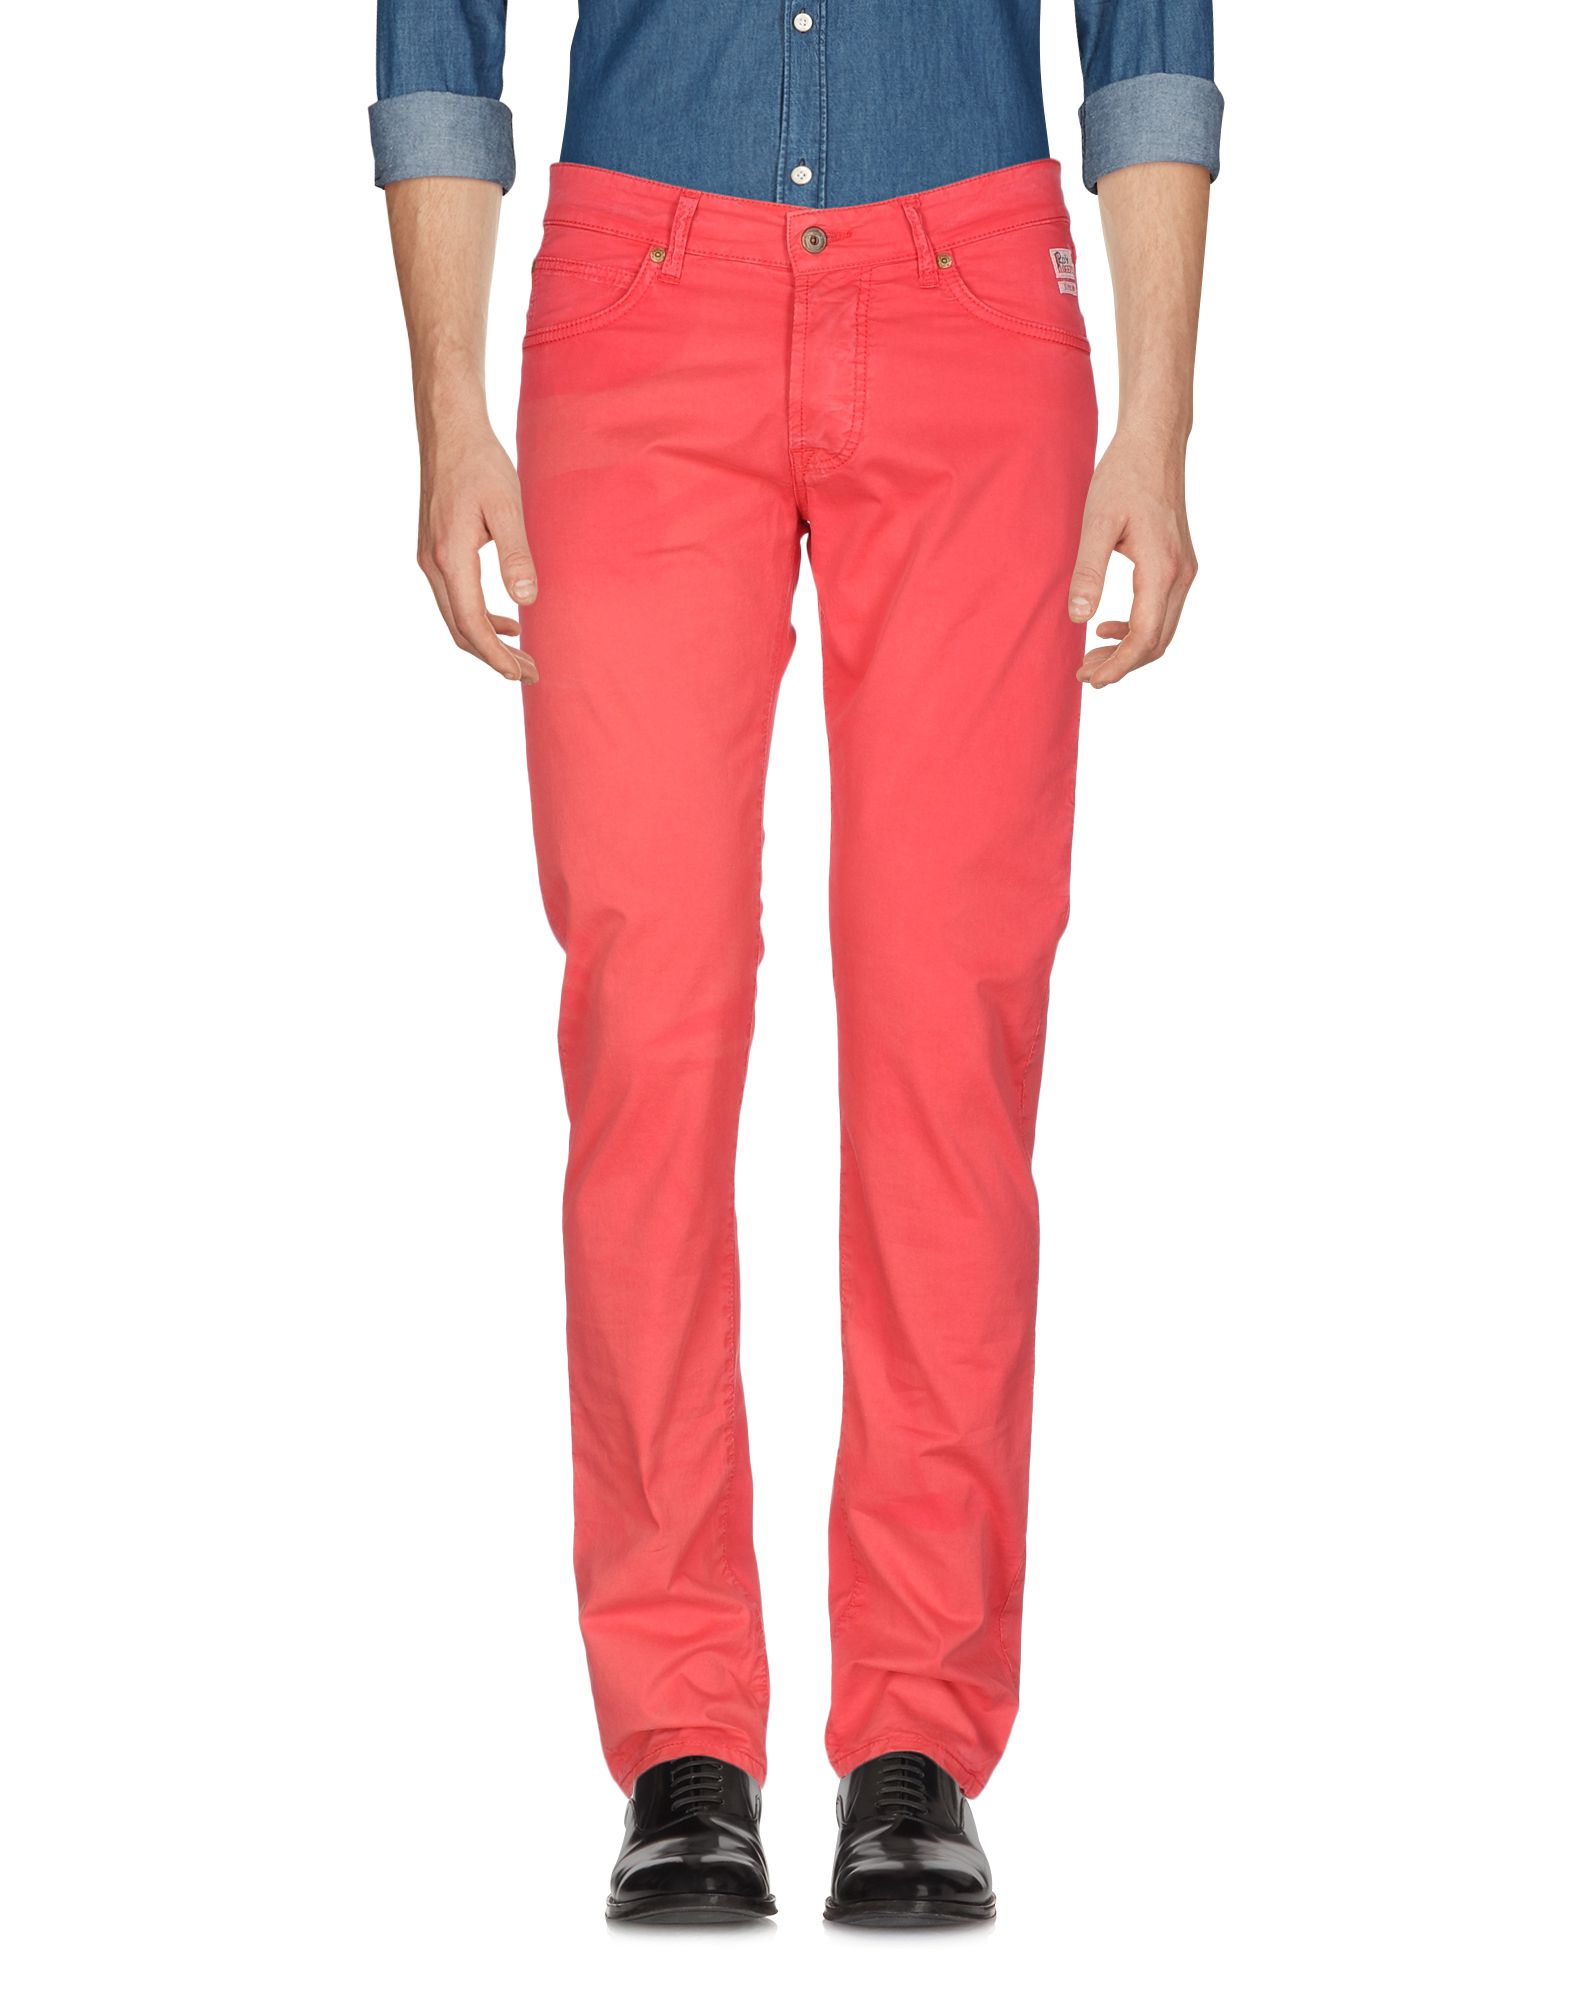 Roy Rogers Pants In Coral